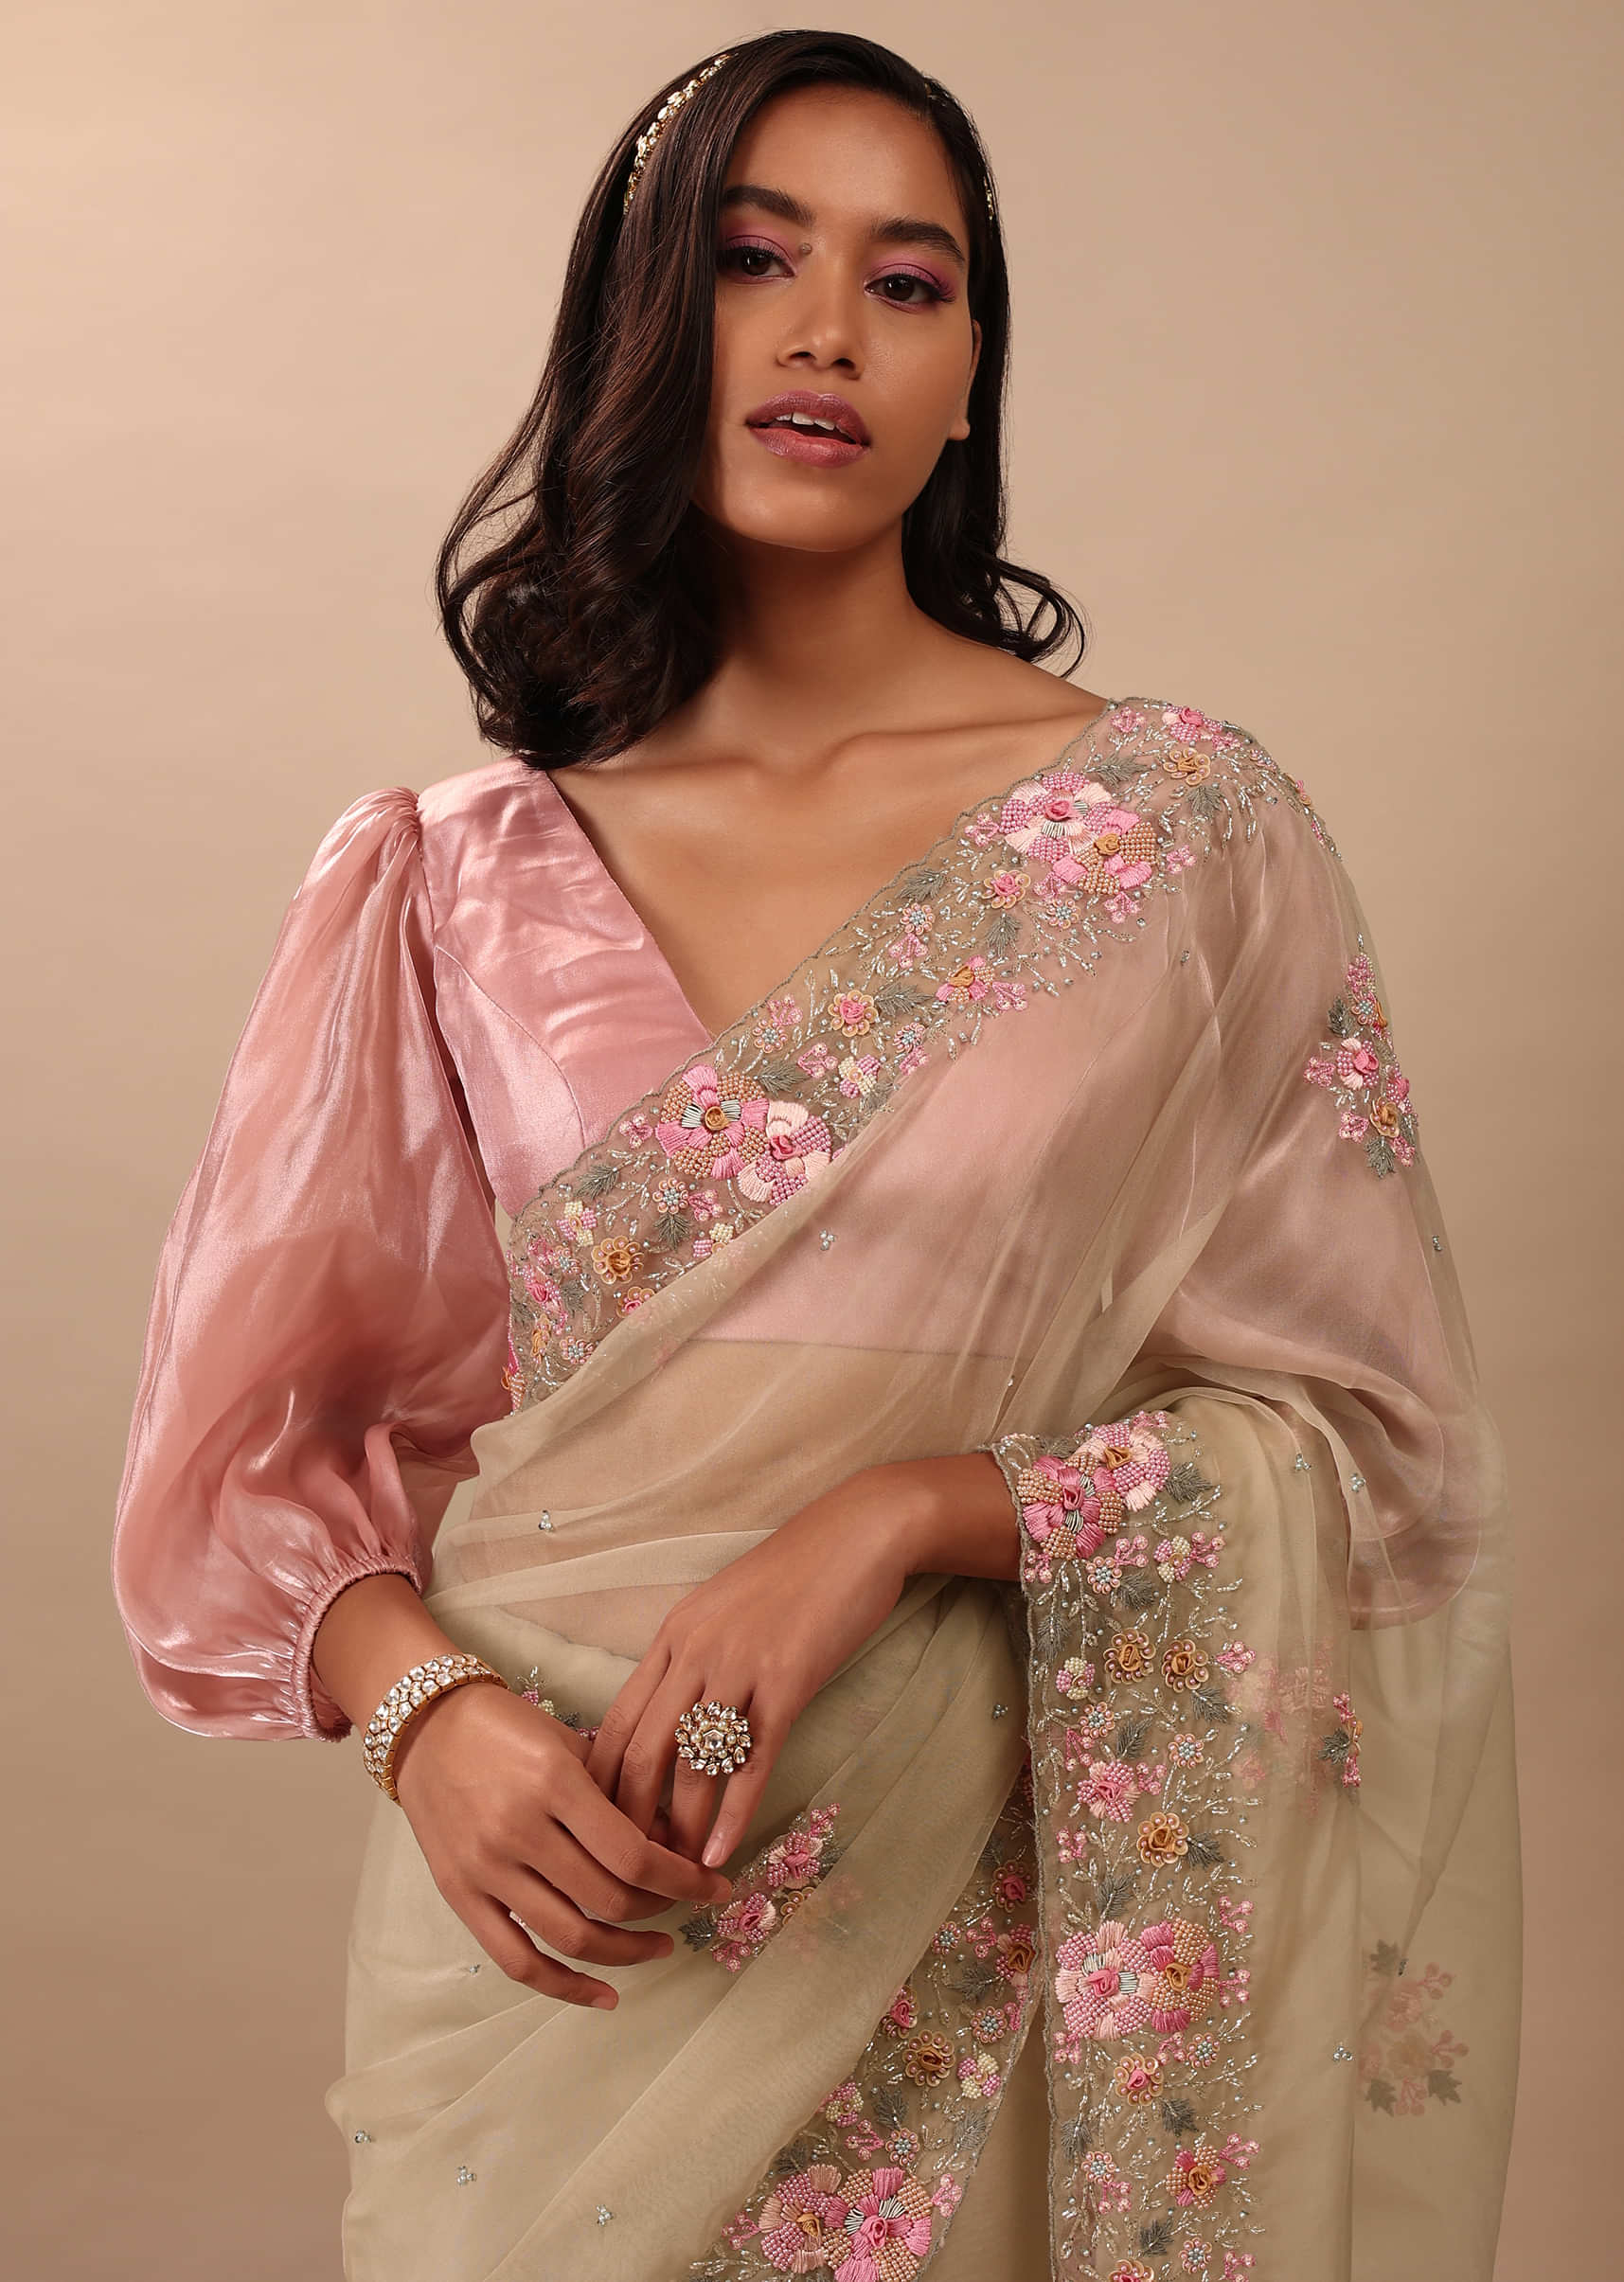 Beige White Saree In Organza Fabric And Floral Embroidery With Cut Dana & Moti